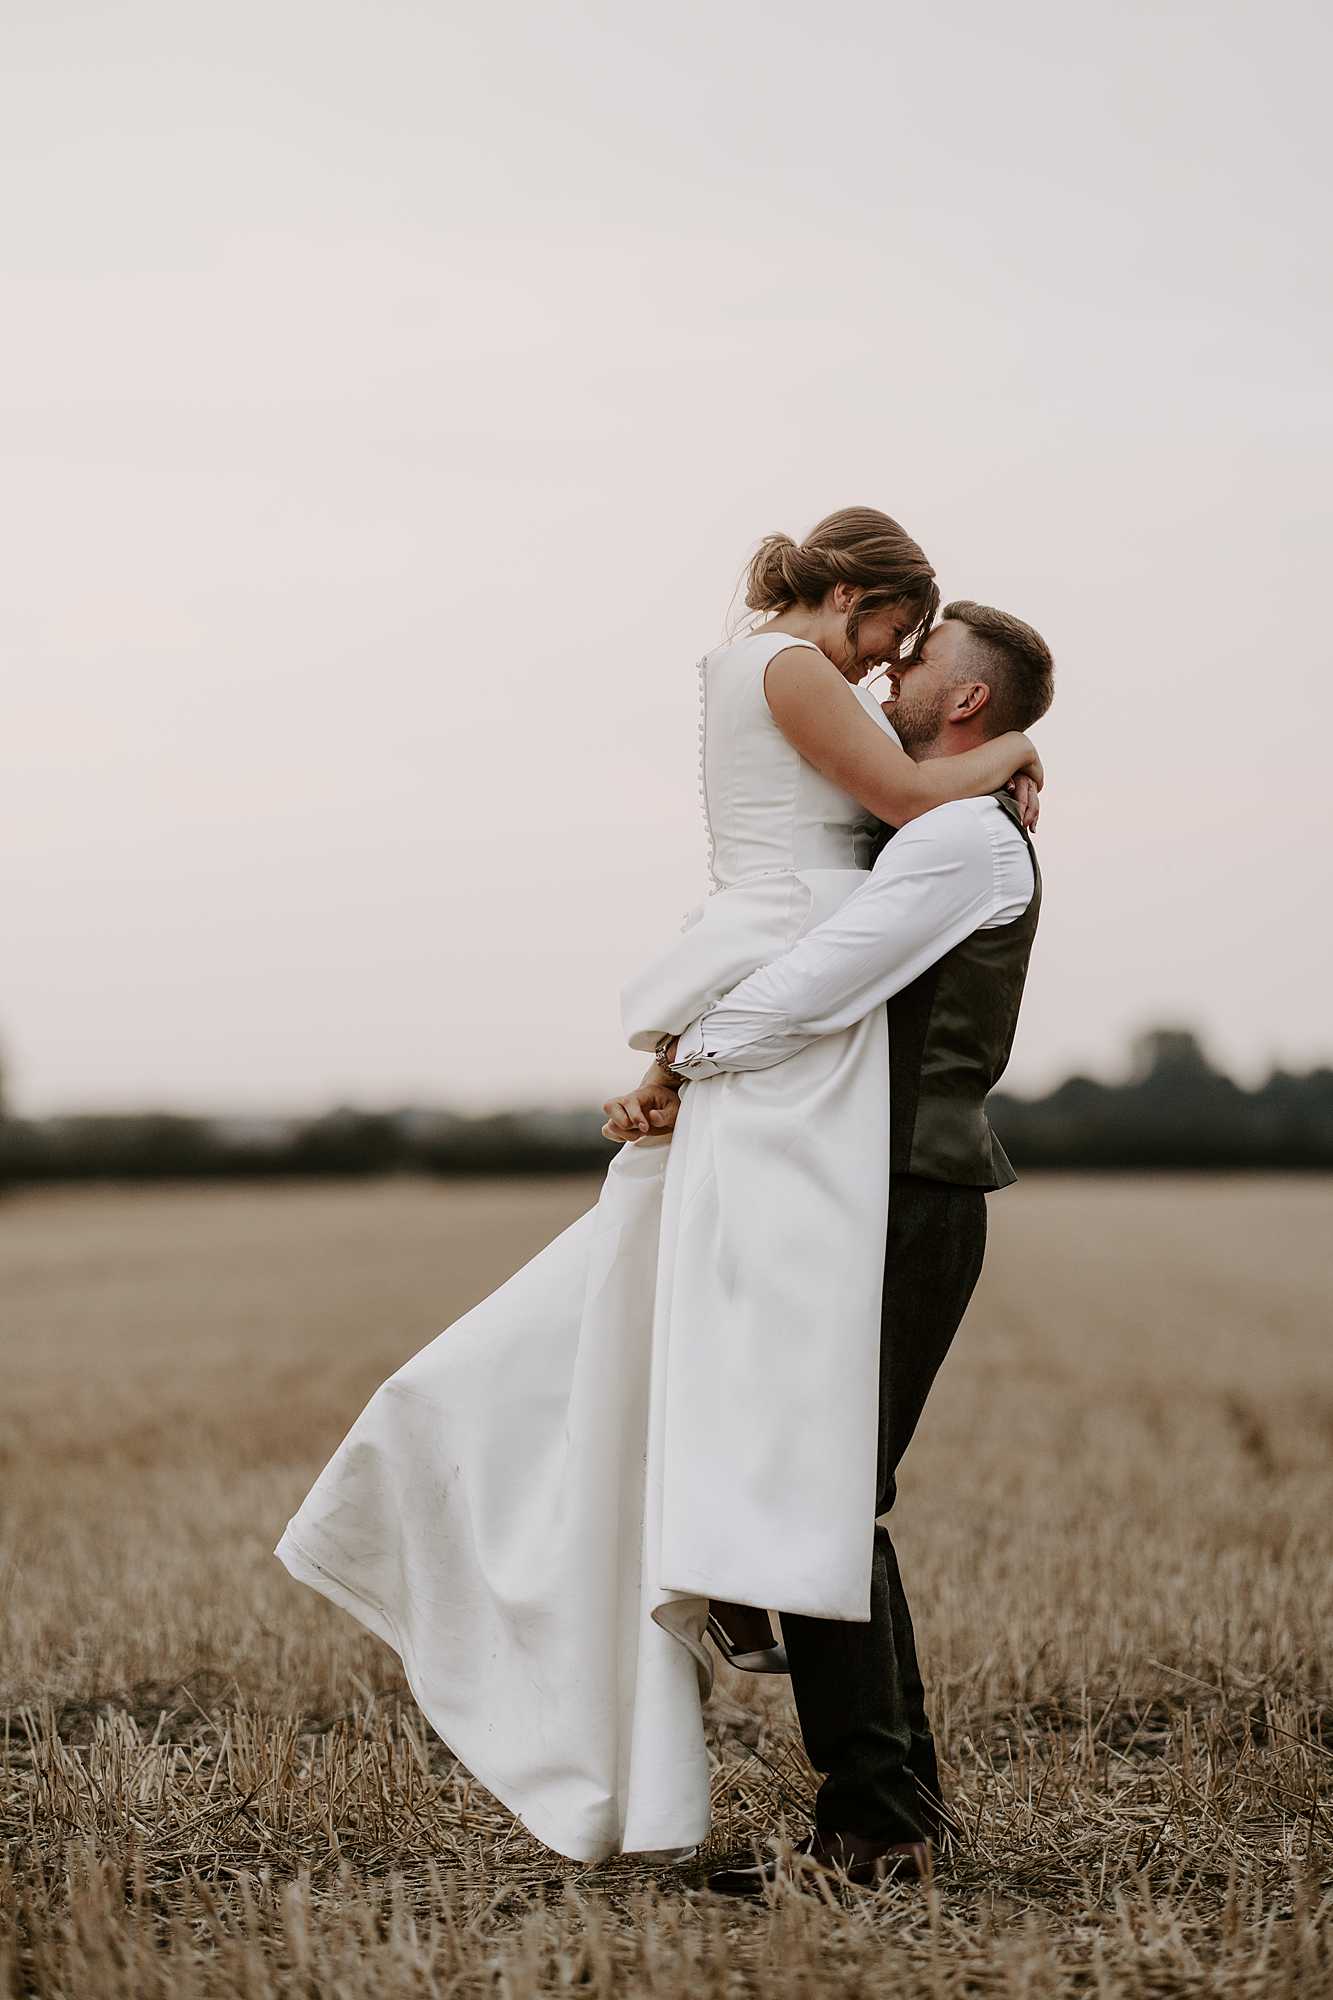 September wedding at Winters Barns with Katey and Stephen